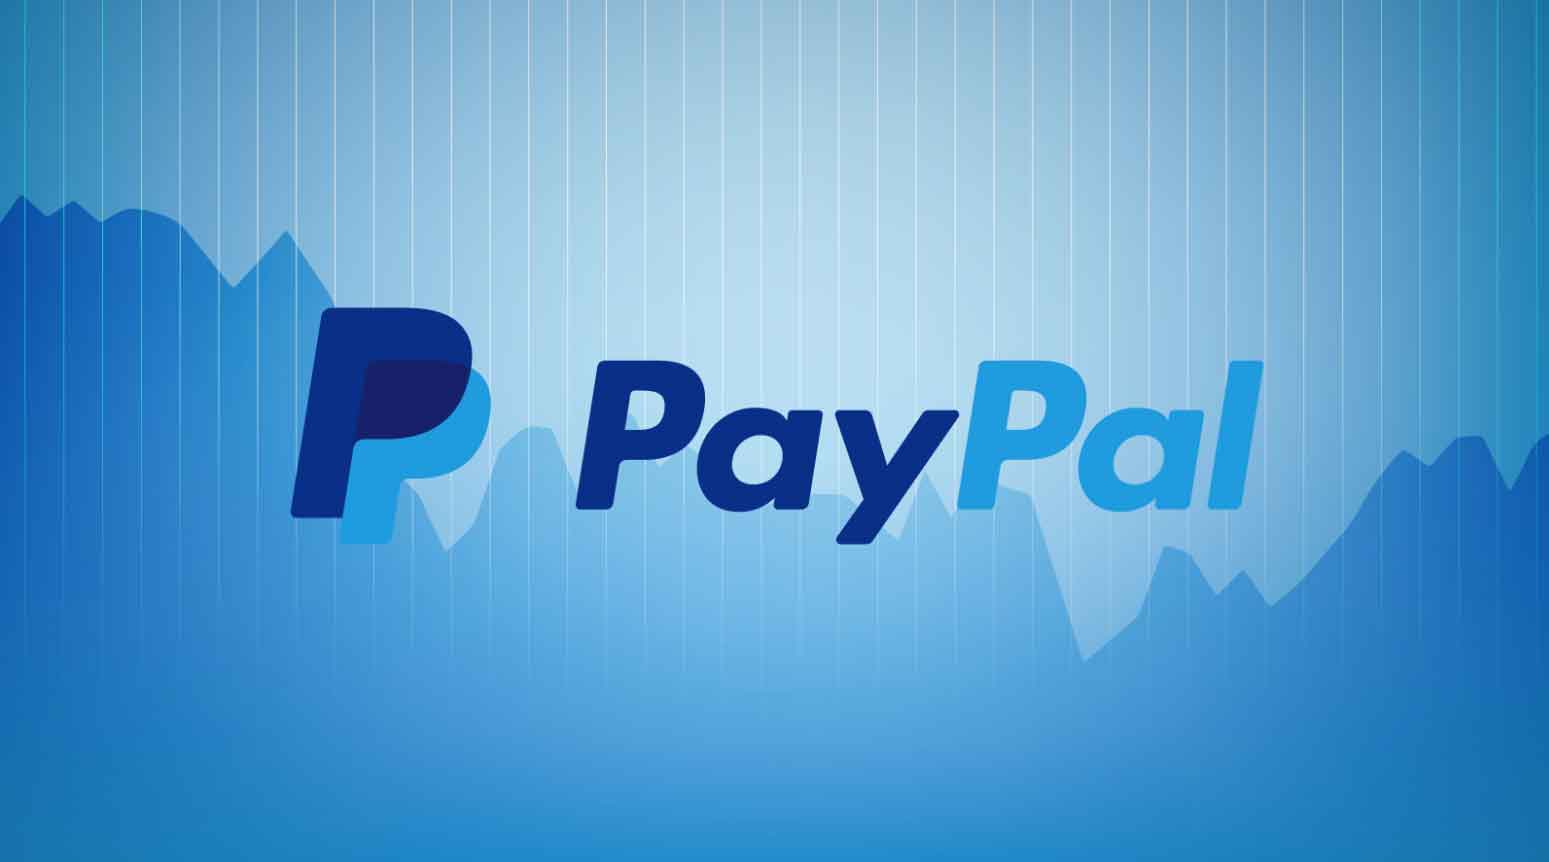 PayPal taps Intuit veteran Chriss as new CEO